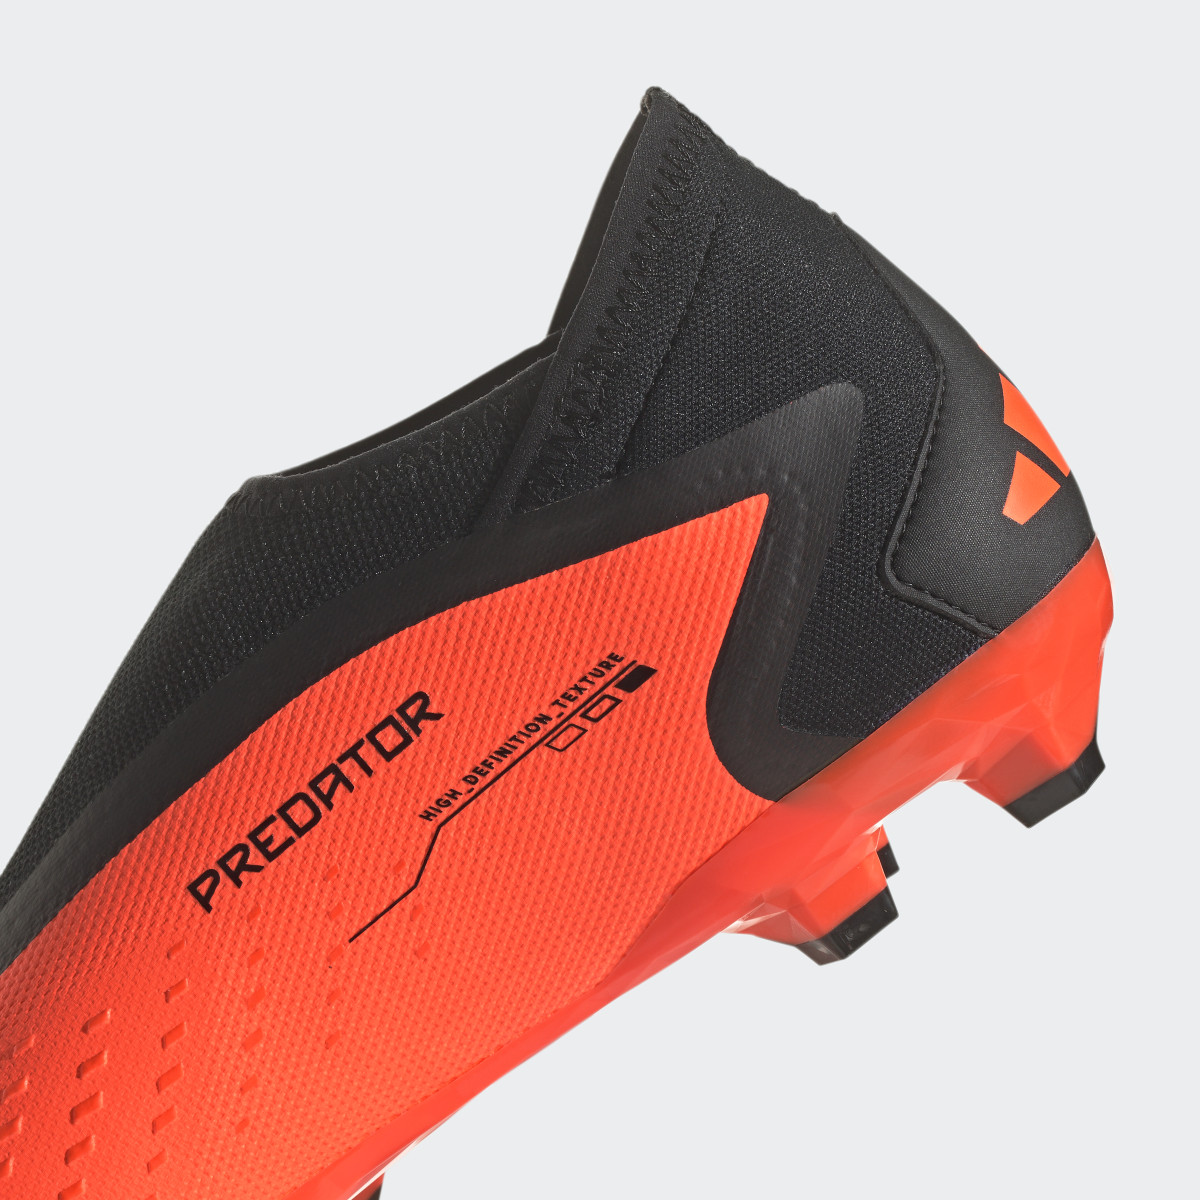 Adidas Predator Accuracy.3 Laceless Firm Ground Boots. 10